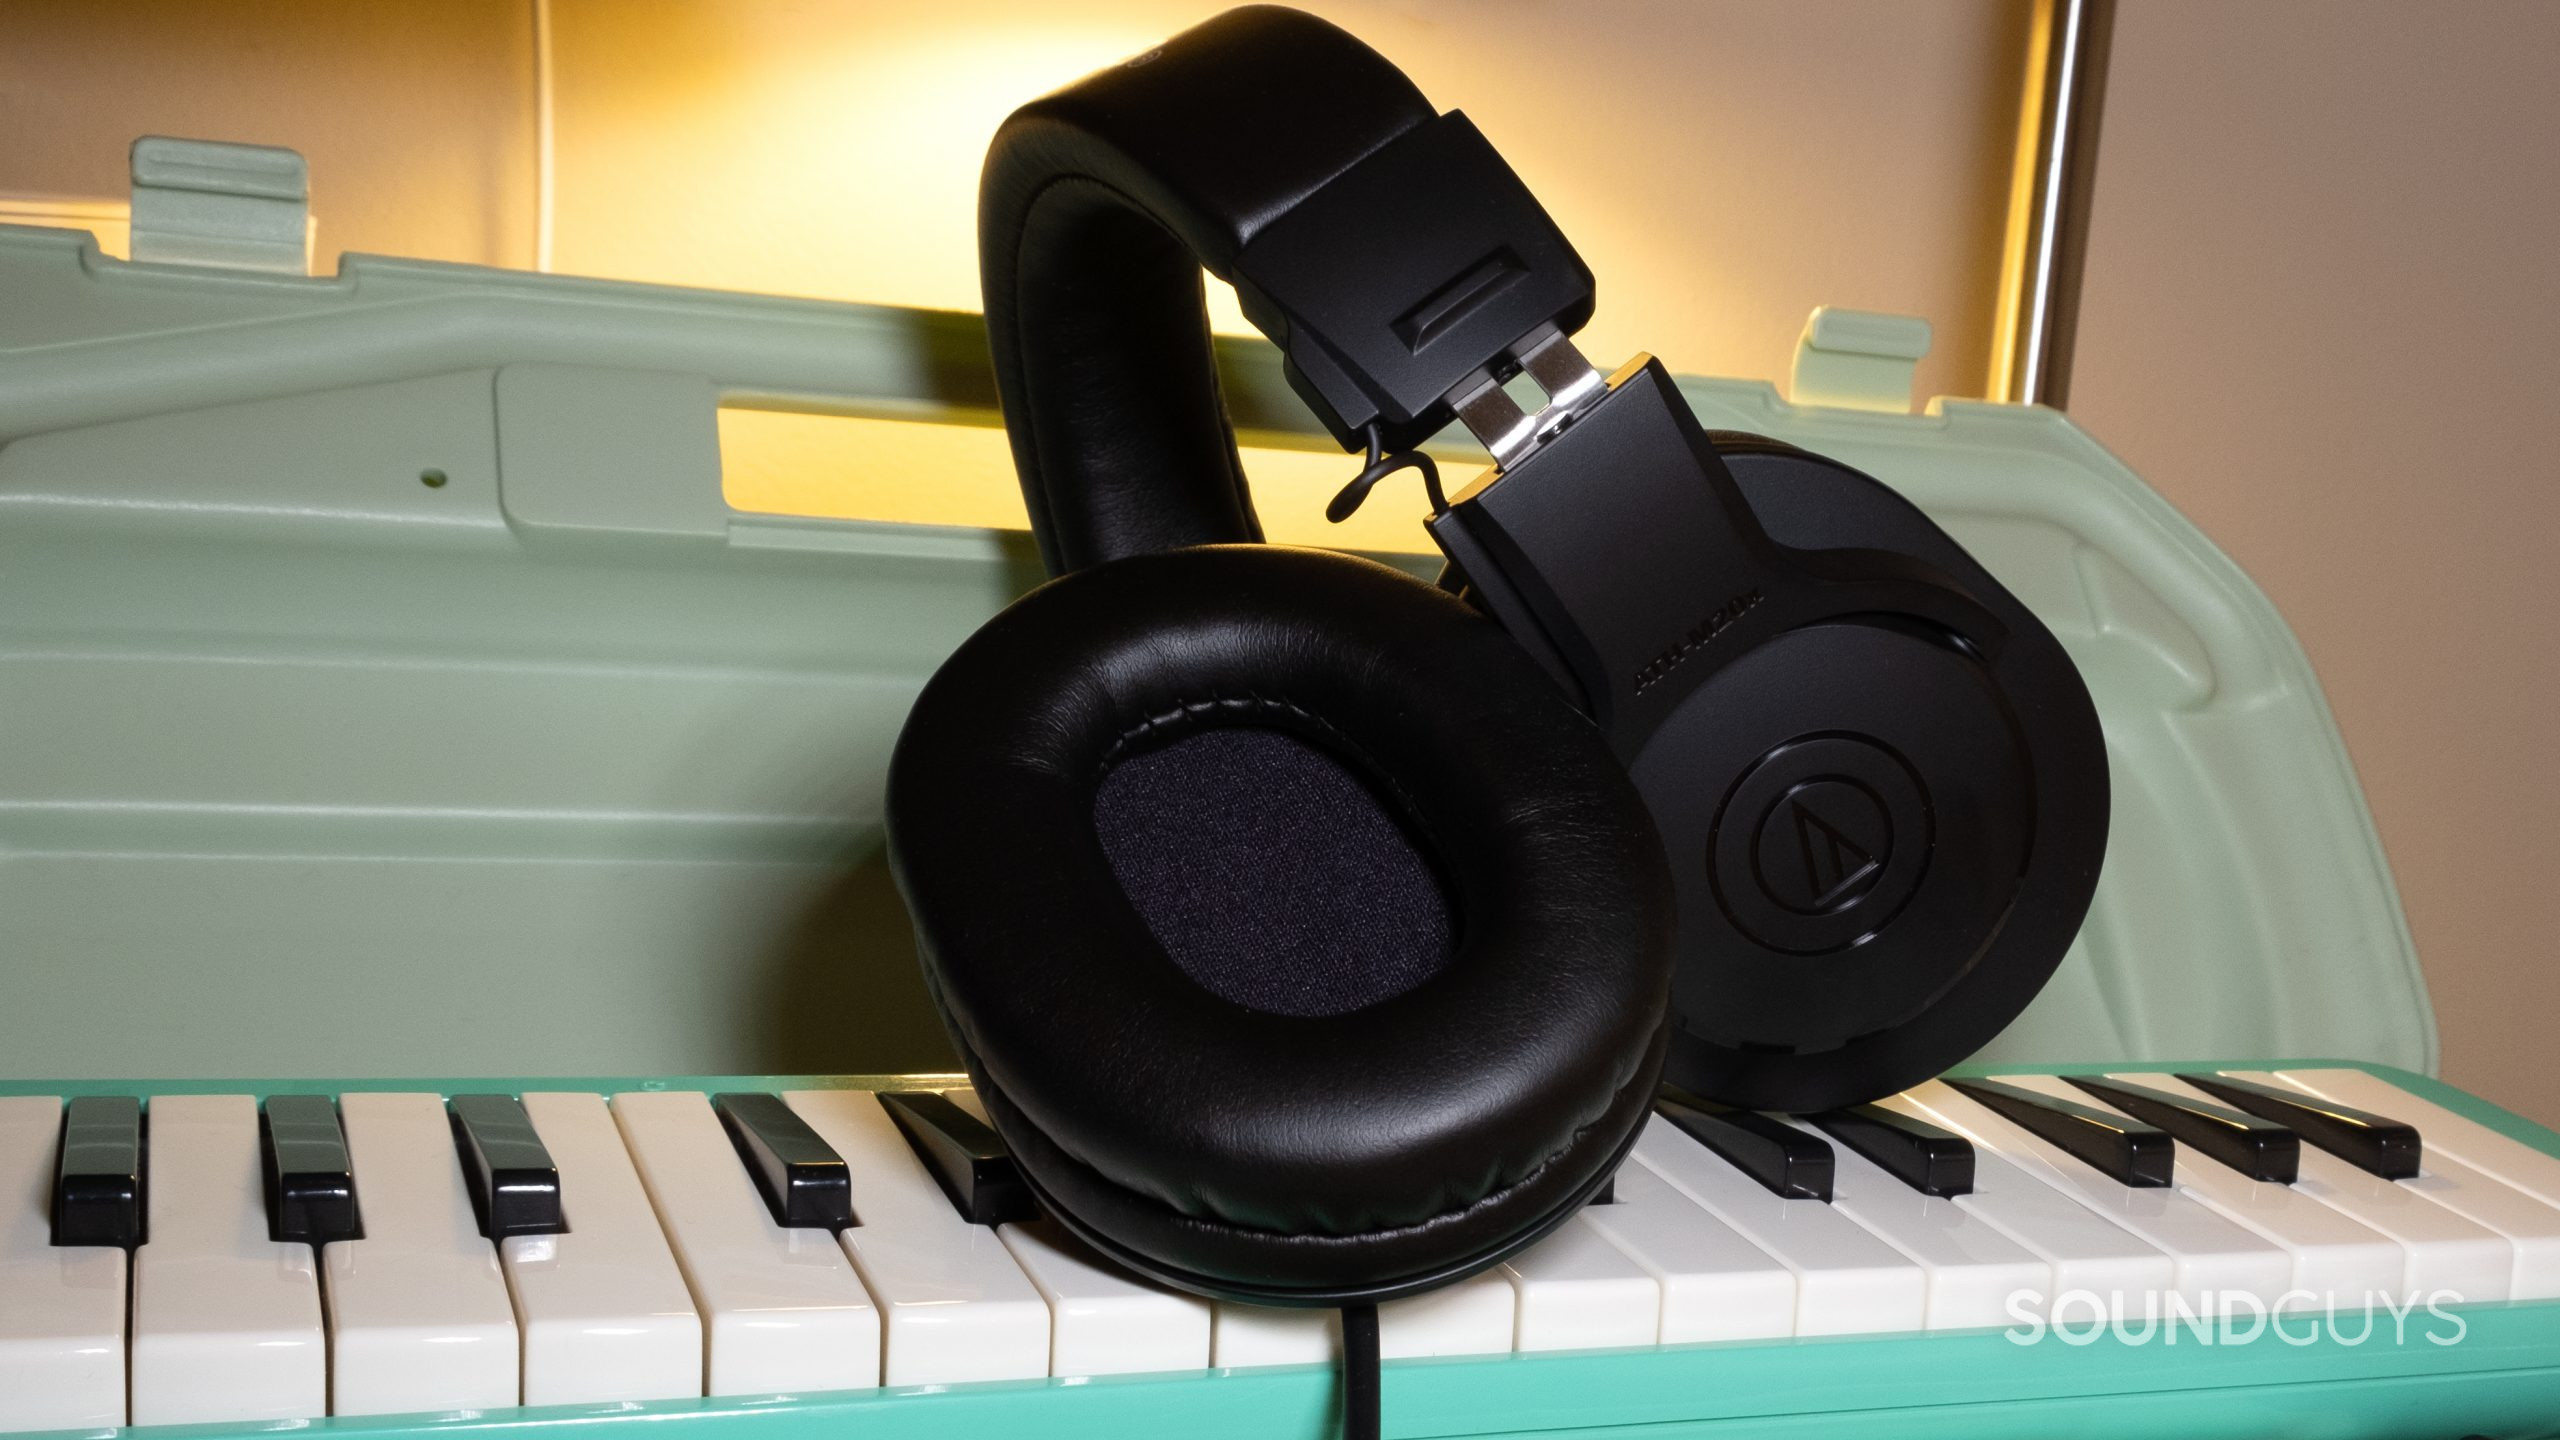 The Audio-Technica ATH-M20x twisted to show the padding and the amount of flex the headset has.